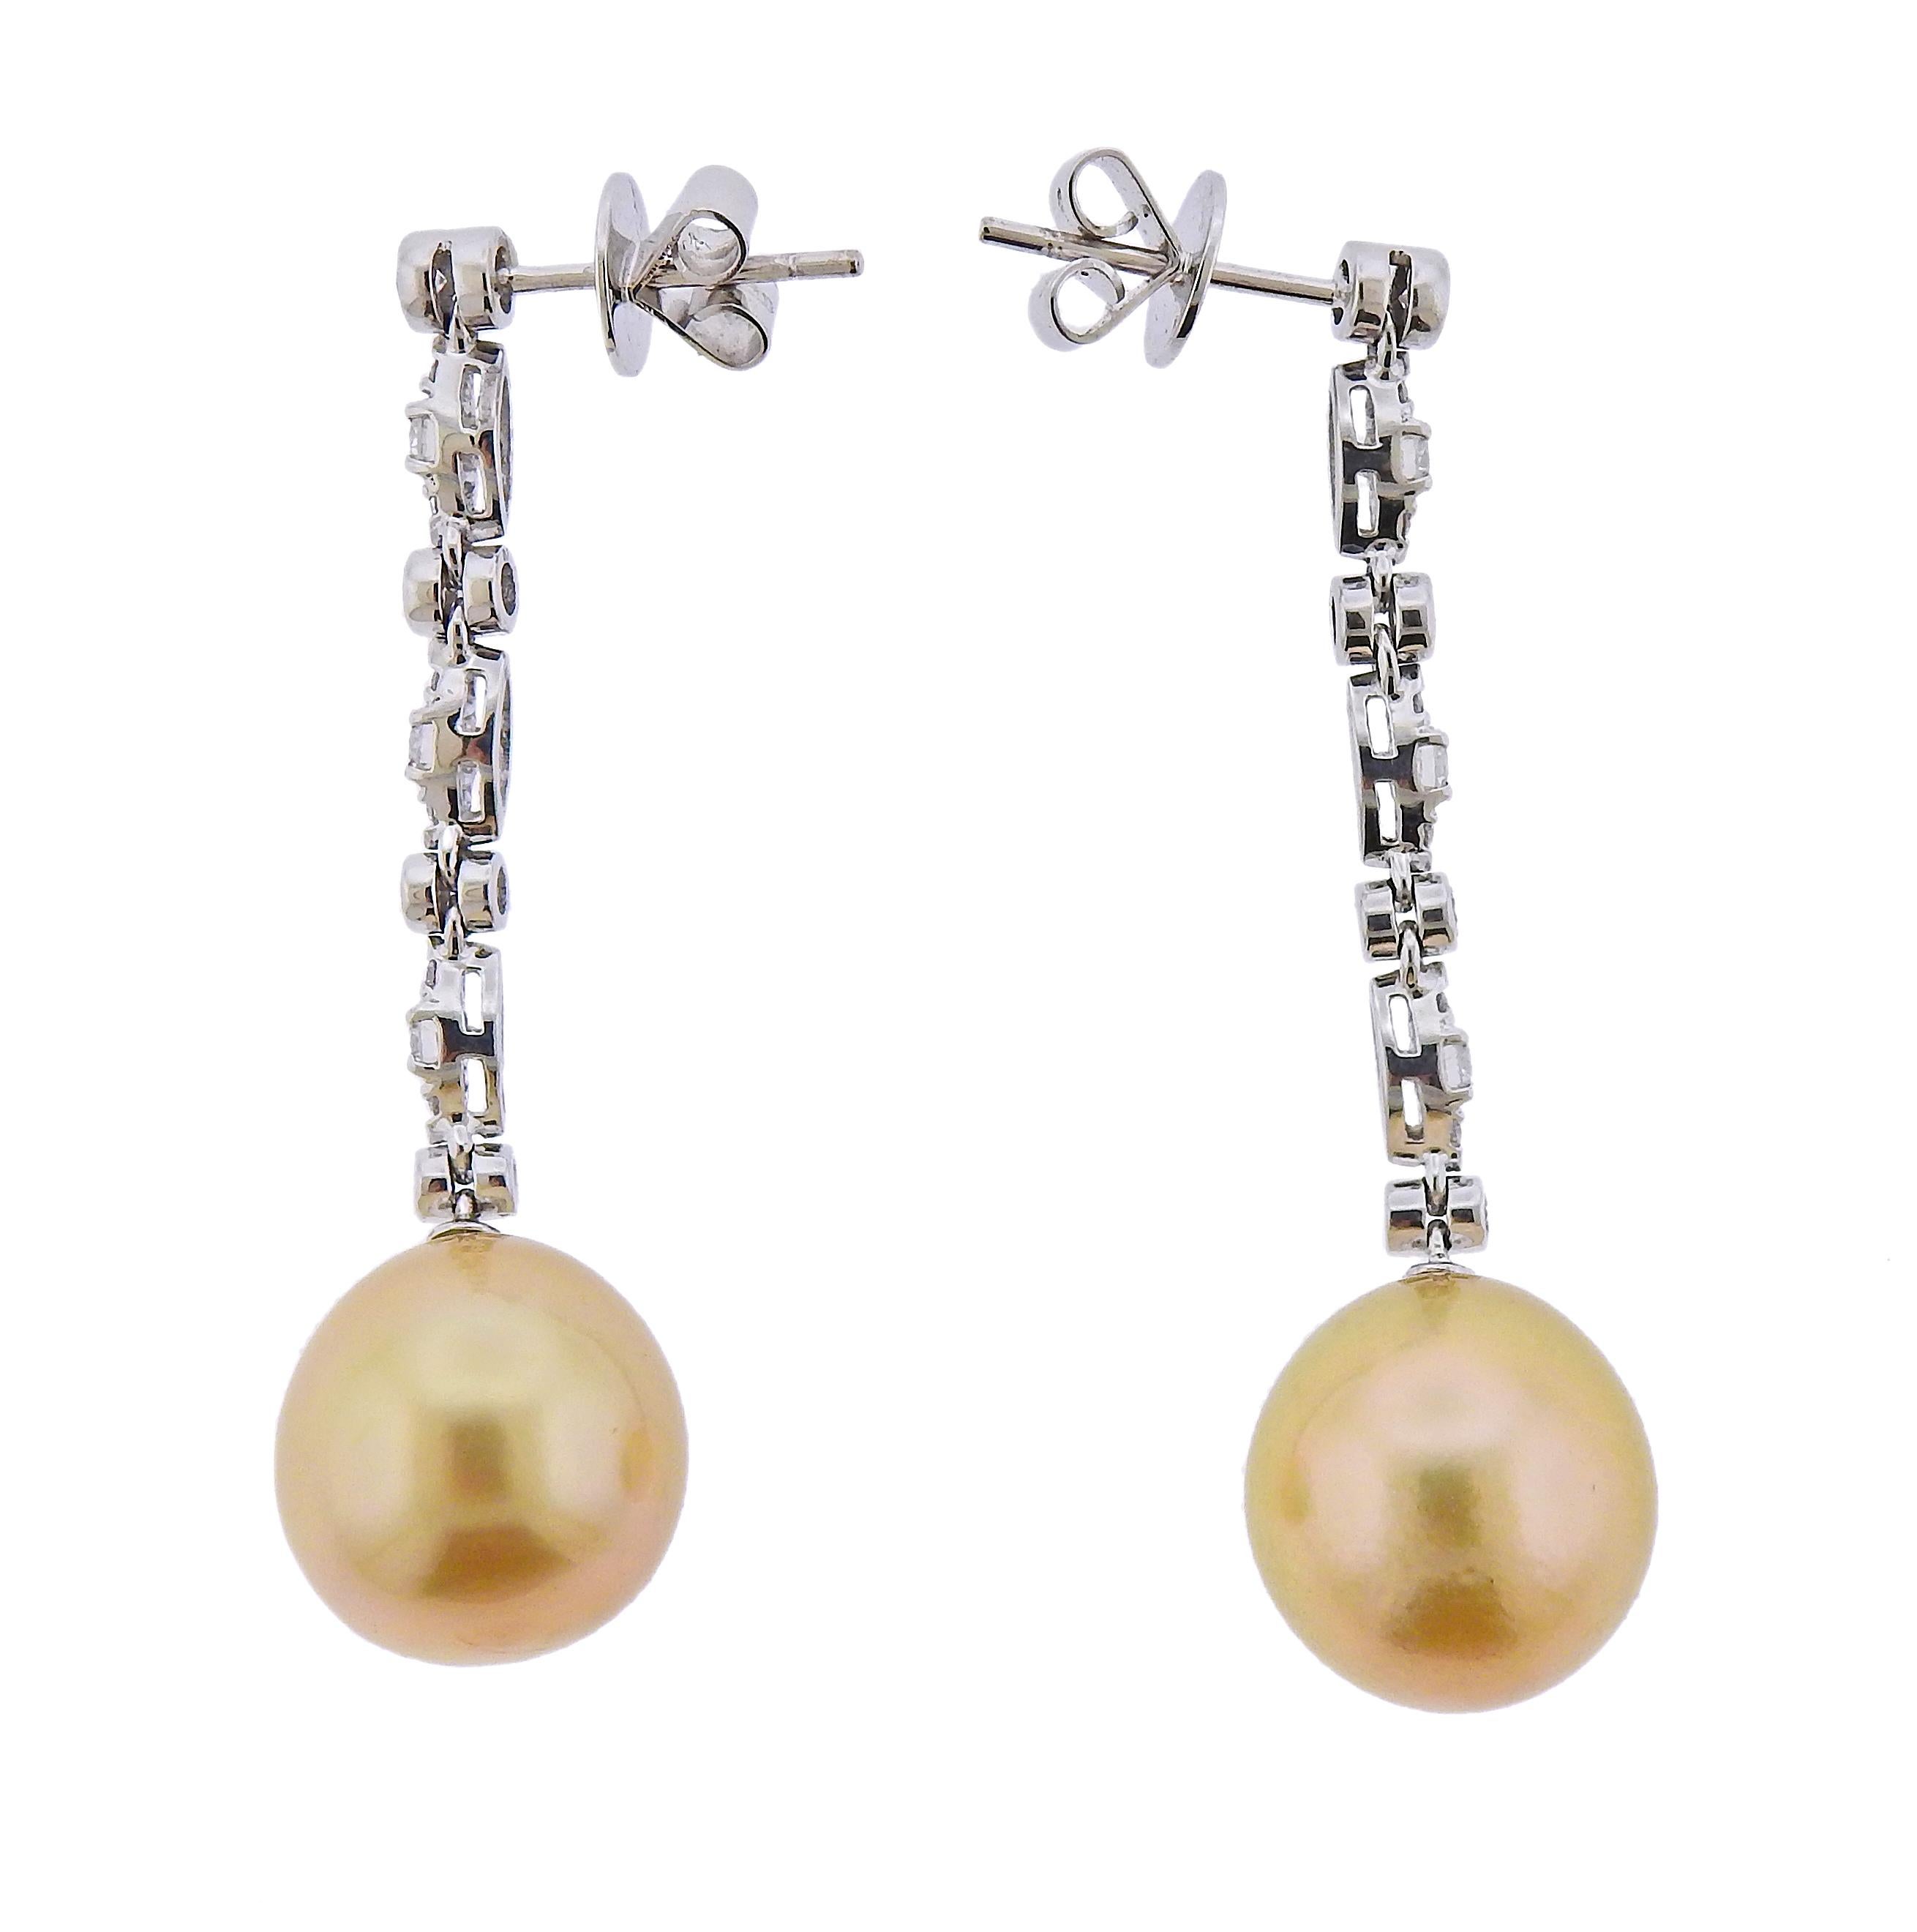 Pair of new Assael long drop earrings in 18k gold, with approx. 0.83ctw in G/VS diamonds and 13mm Golden South Sea Pearls.  Retail $8900. Come with pouch.  Earrings are 48mm long. Weight - 10.8 grams. Marked: 750, Assael. 